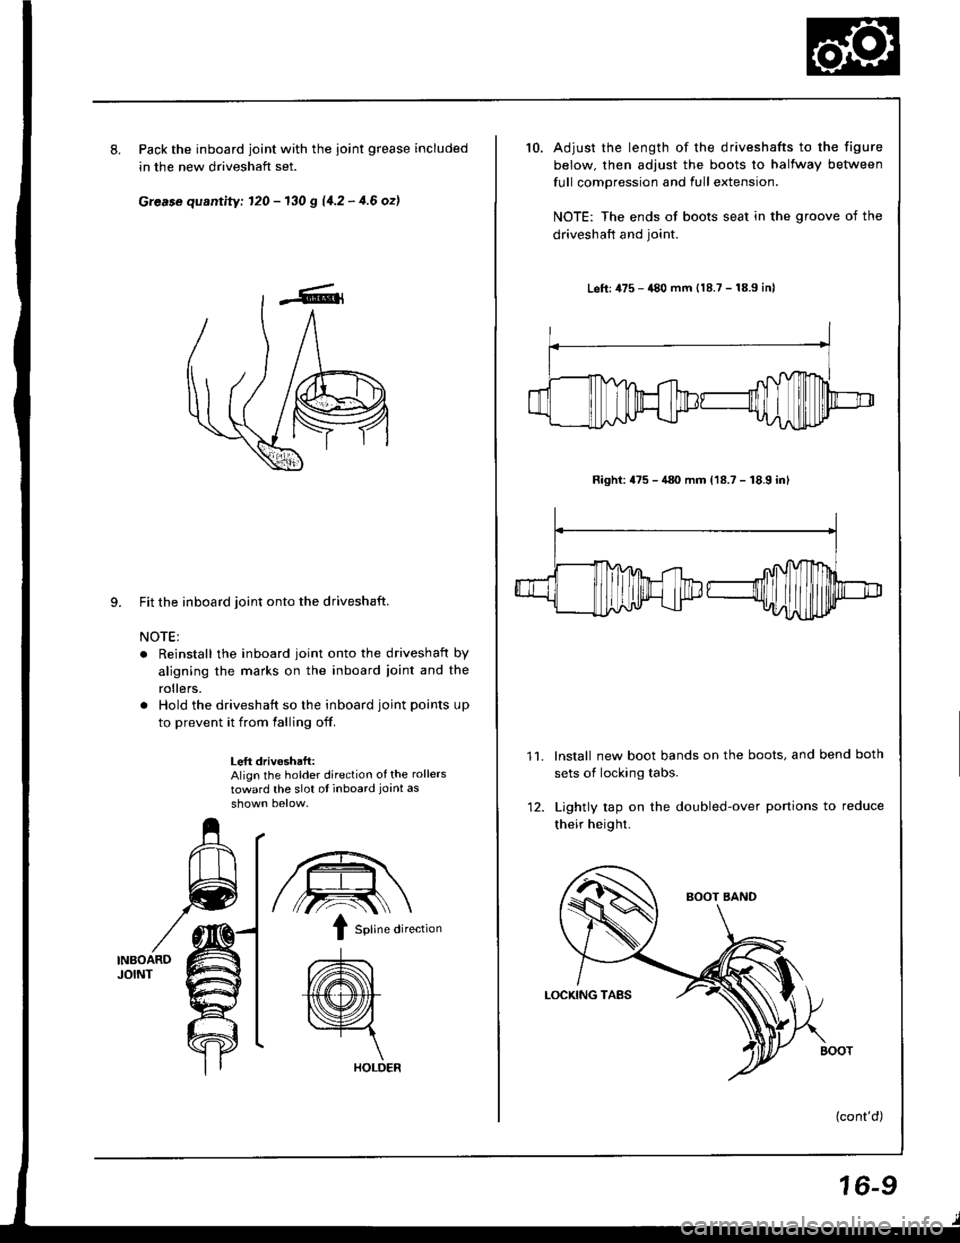 HONDA INTEGRA 1994 4.G User Guide 8.Pack the inboard joint with the ioint grease included
in the new driveshaft set.
Grease quantity; 120 - 130 g 11.2 - 4.6 ozl
9. Fit the inboard joint onto the driveshaft.
NOTE;
. Reinstall the inboa